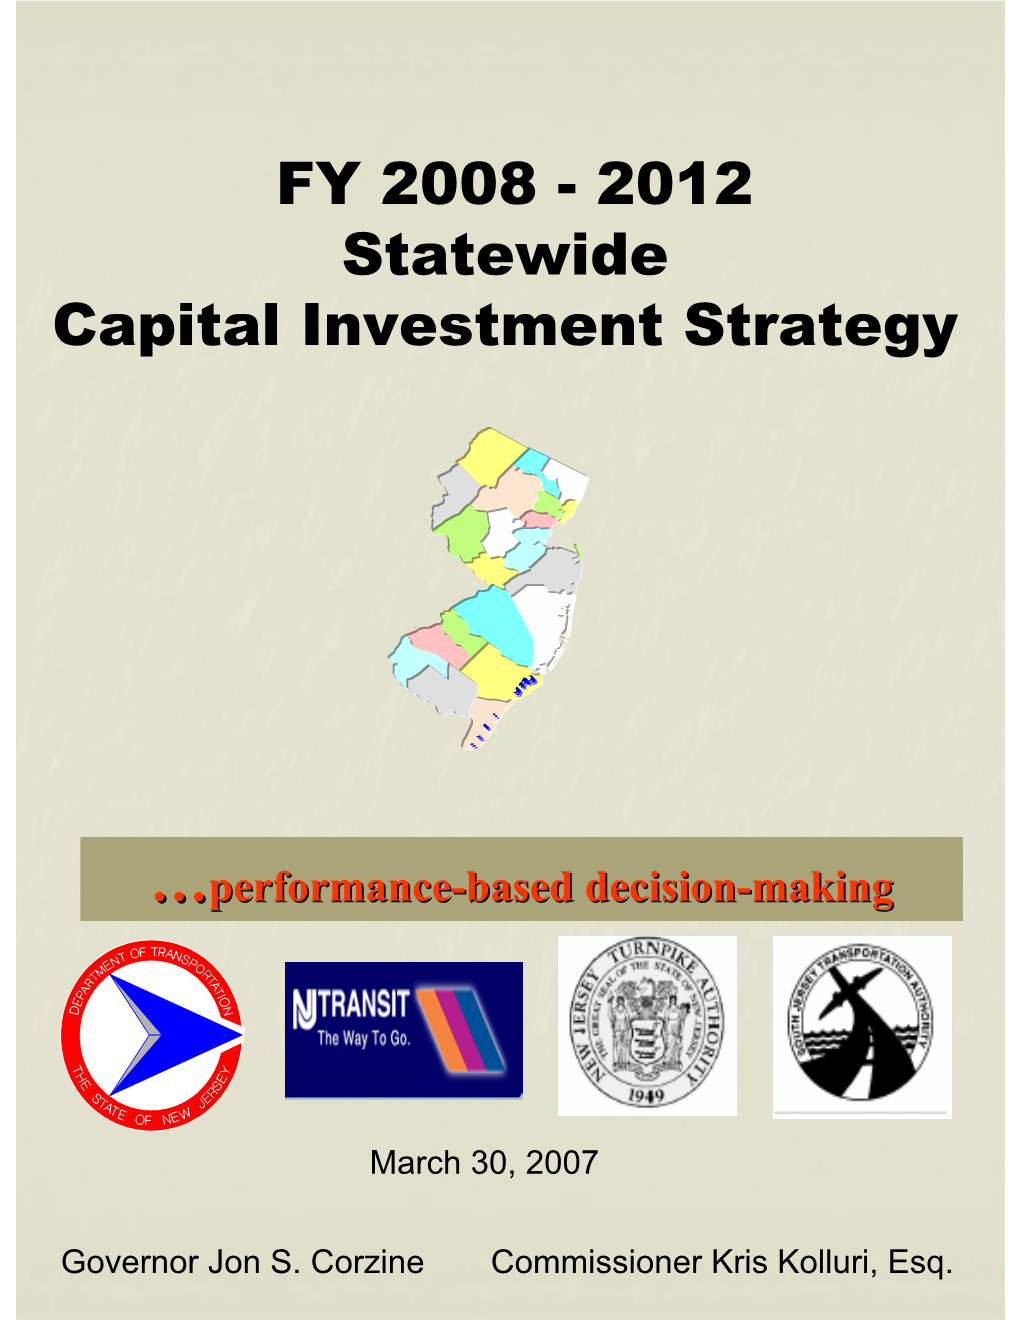 Capital Investment Strategy for Fiscal Years 2008 – 2012